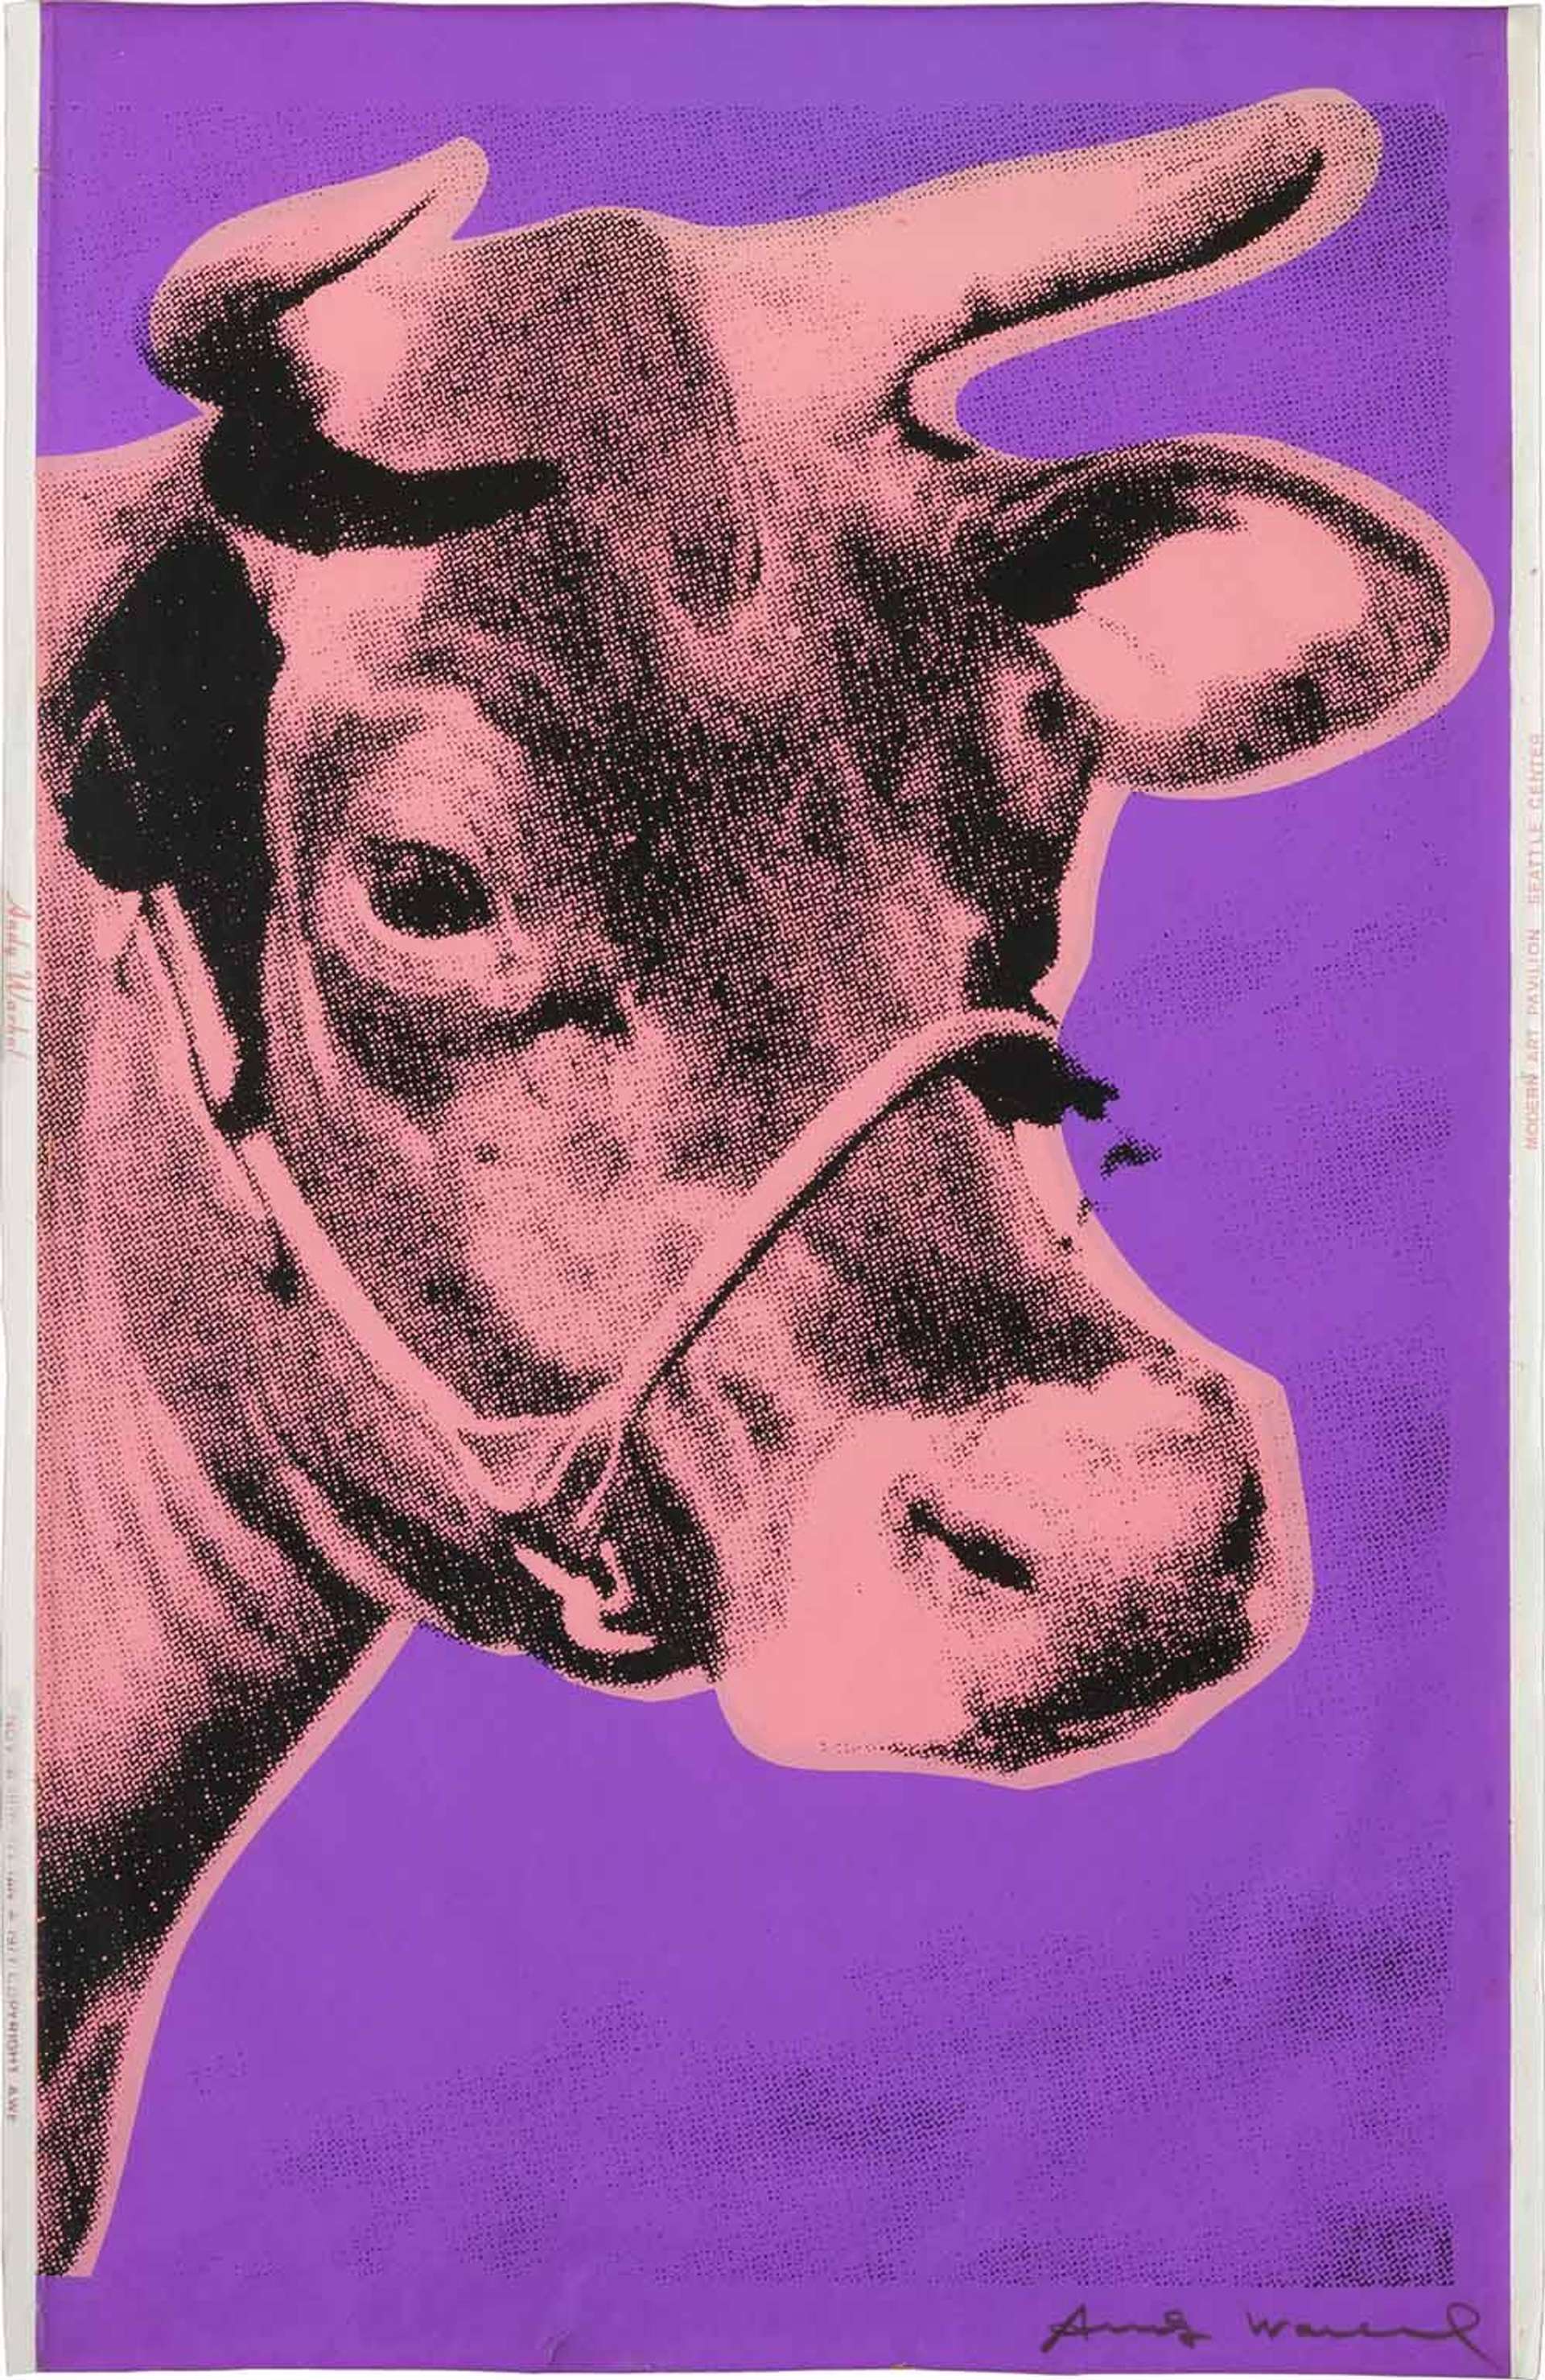 Cow (F. & S. II.12A) by Andy Warhol